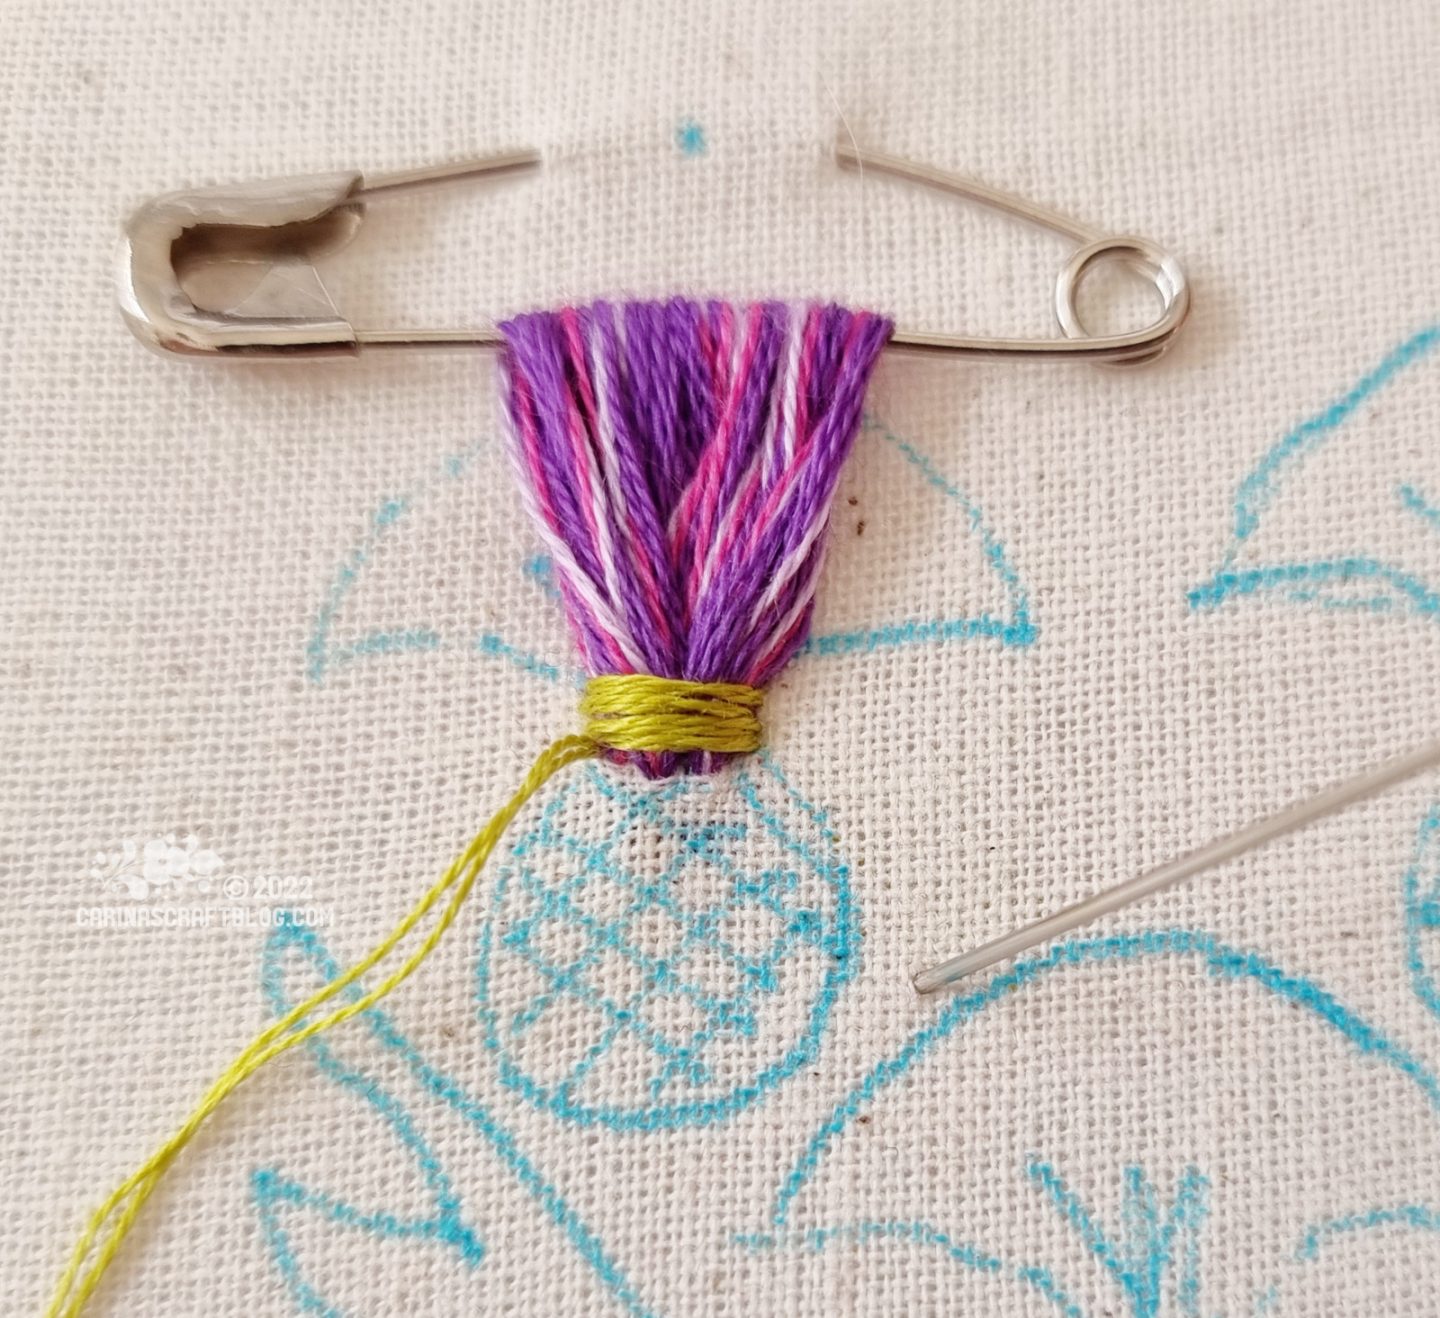 Closeup of a safety pin attached to white fabric. Embroidery thread in purple colours has been looped through the safety pin several times. At the base of the loops, green stitches are made across the pruple thread loops.